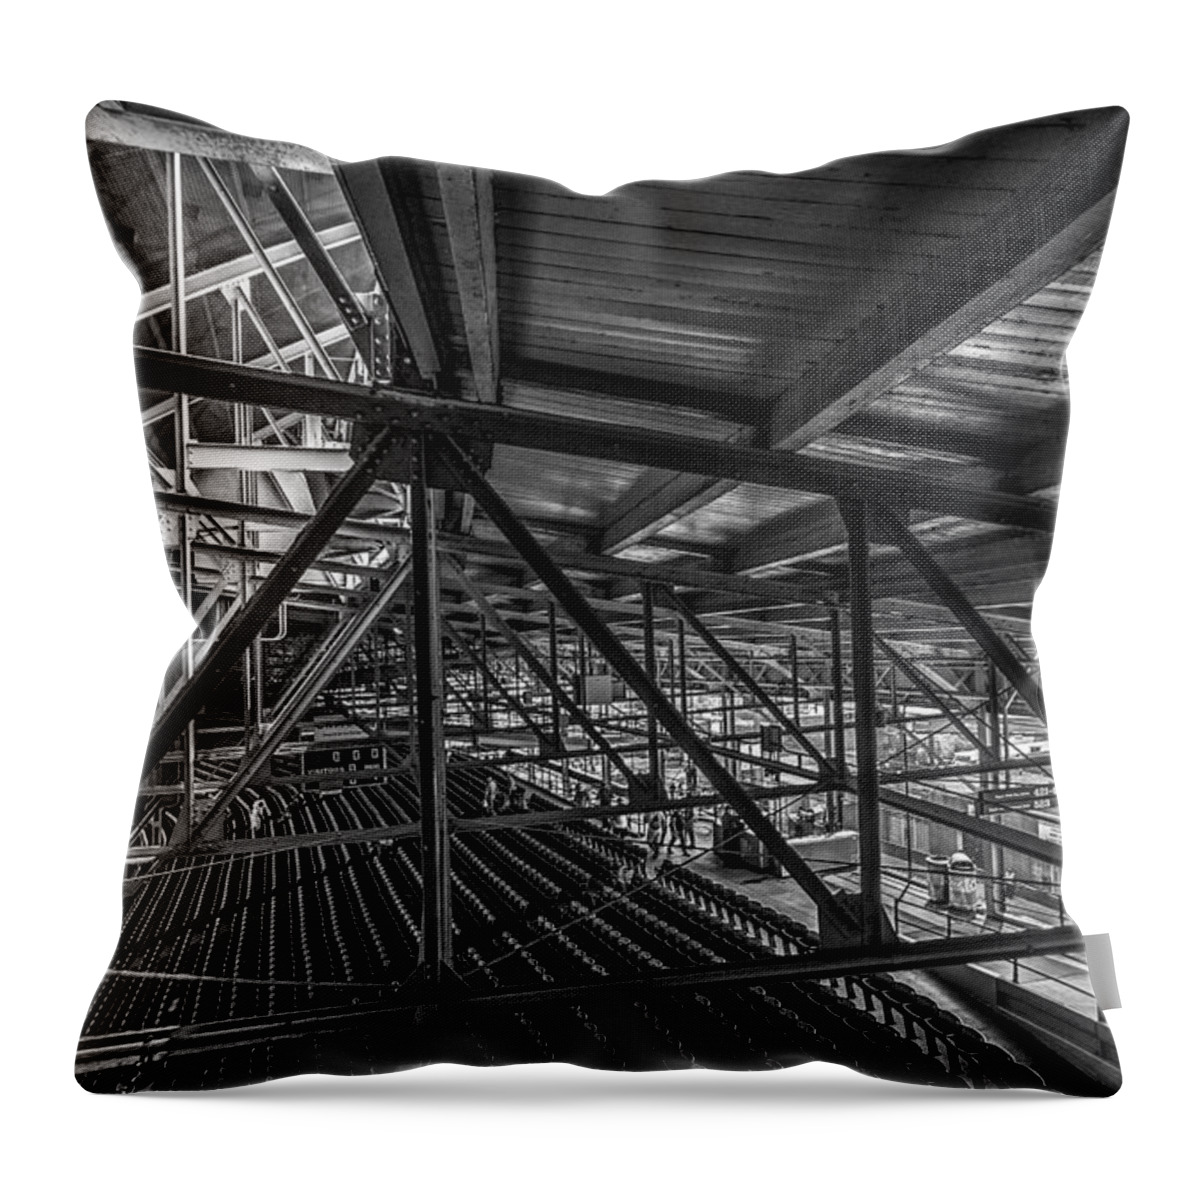 Architecture Throw Pillow featuring the photograph Wrigley Field Girders by Tom Gort